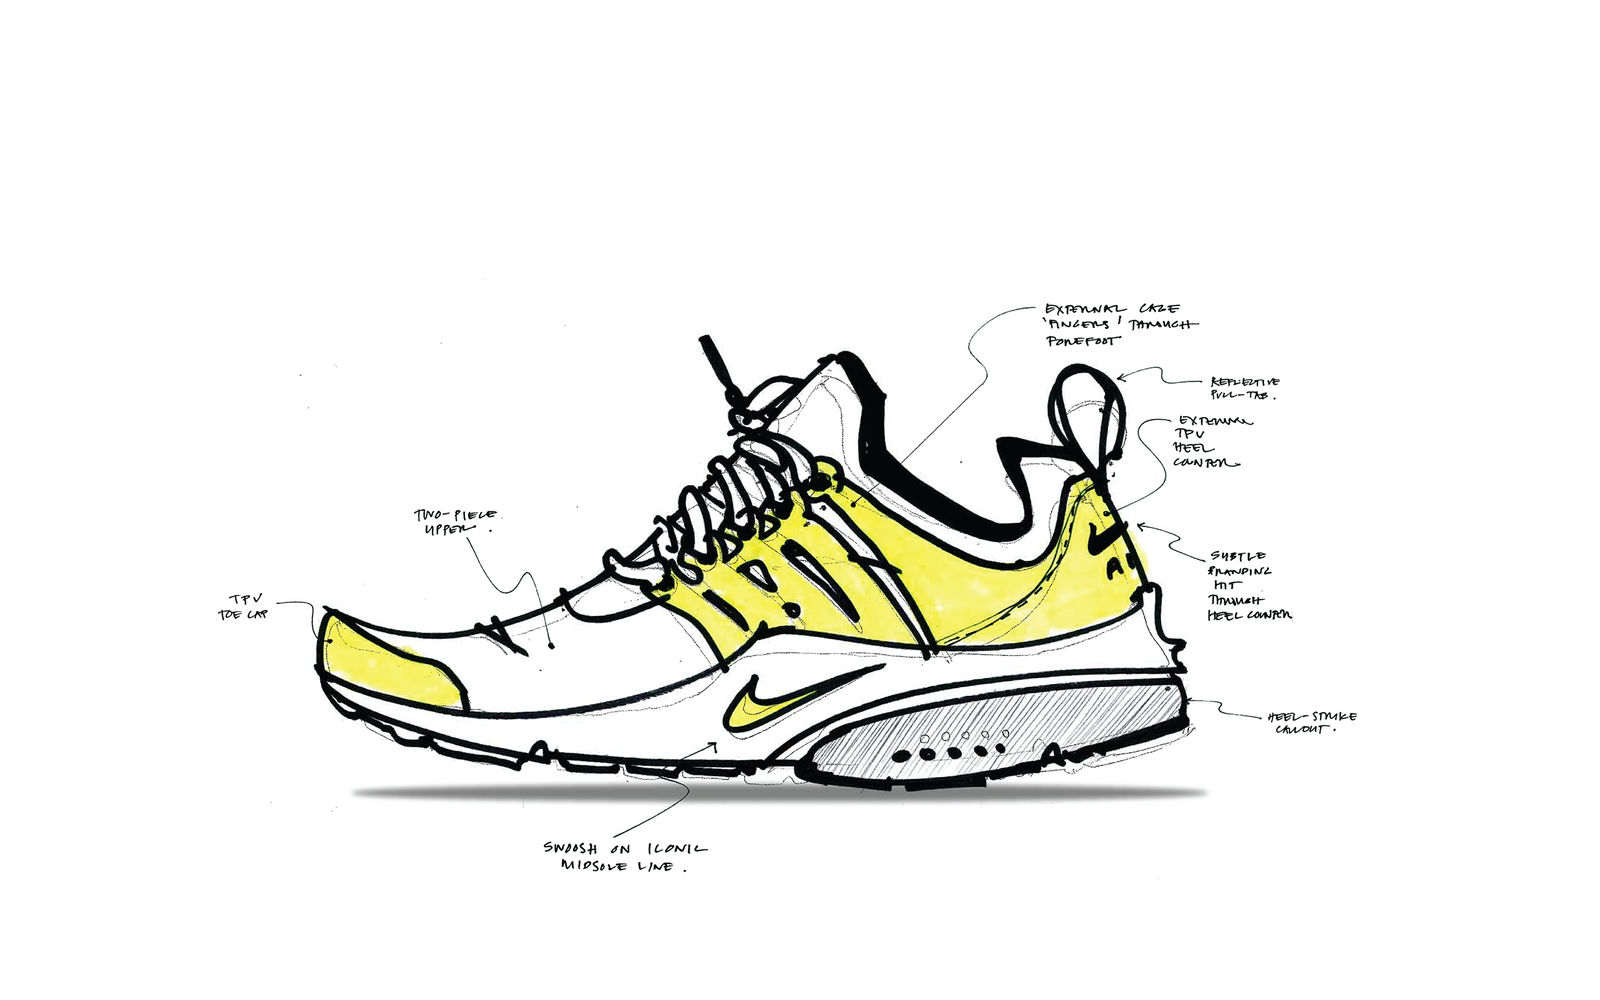 Bouwen Het hotel Golf A history of the Nike Air Presto, the running sneakers that ruled the 2000s